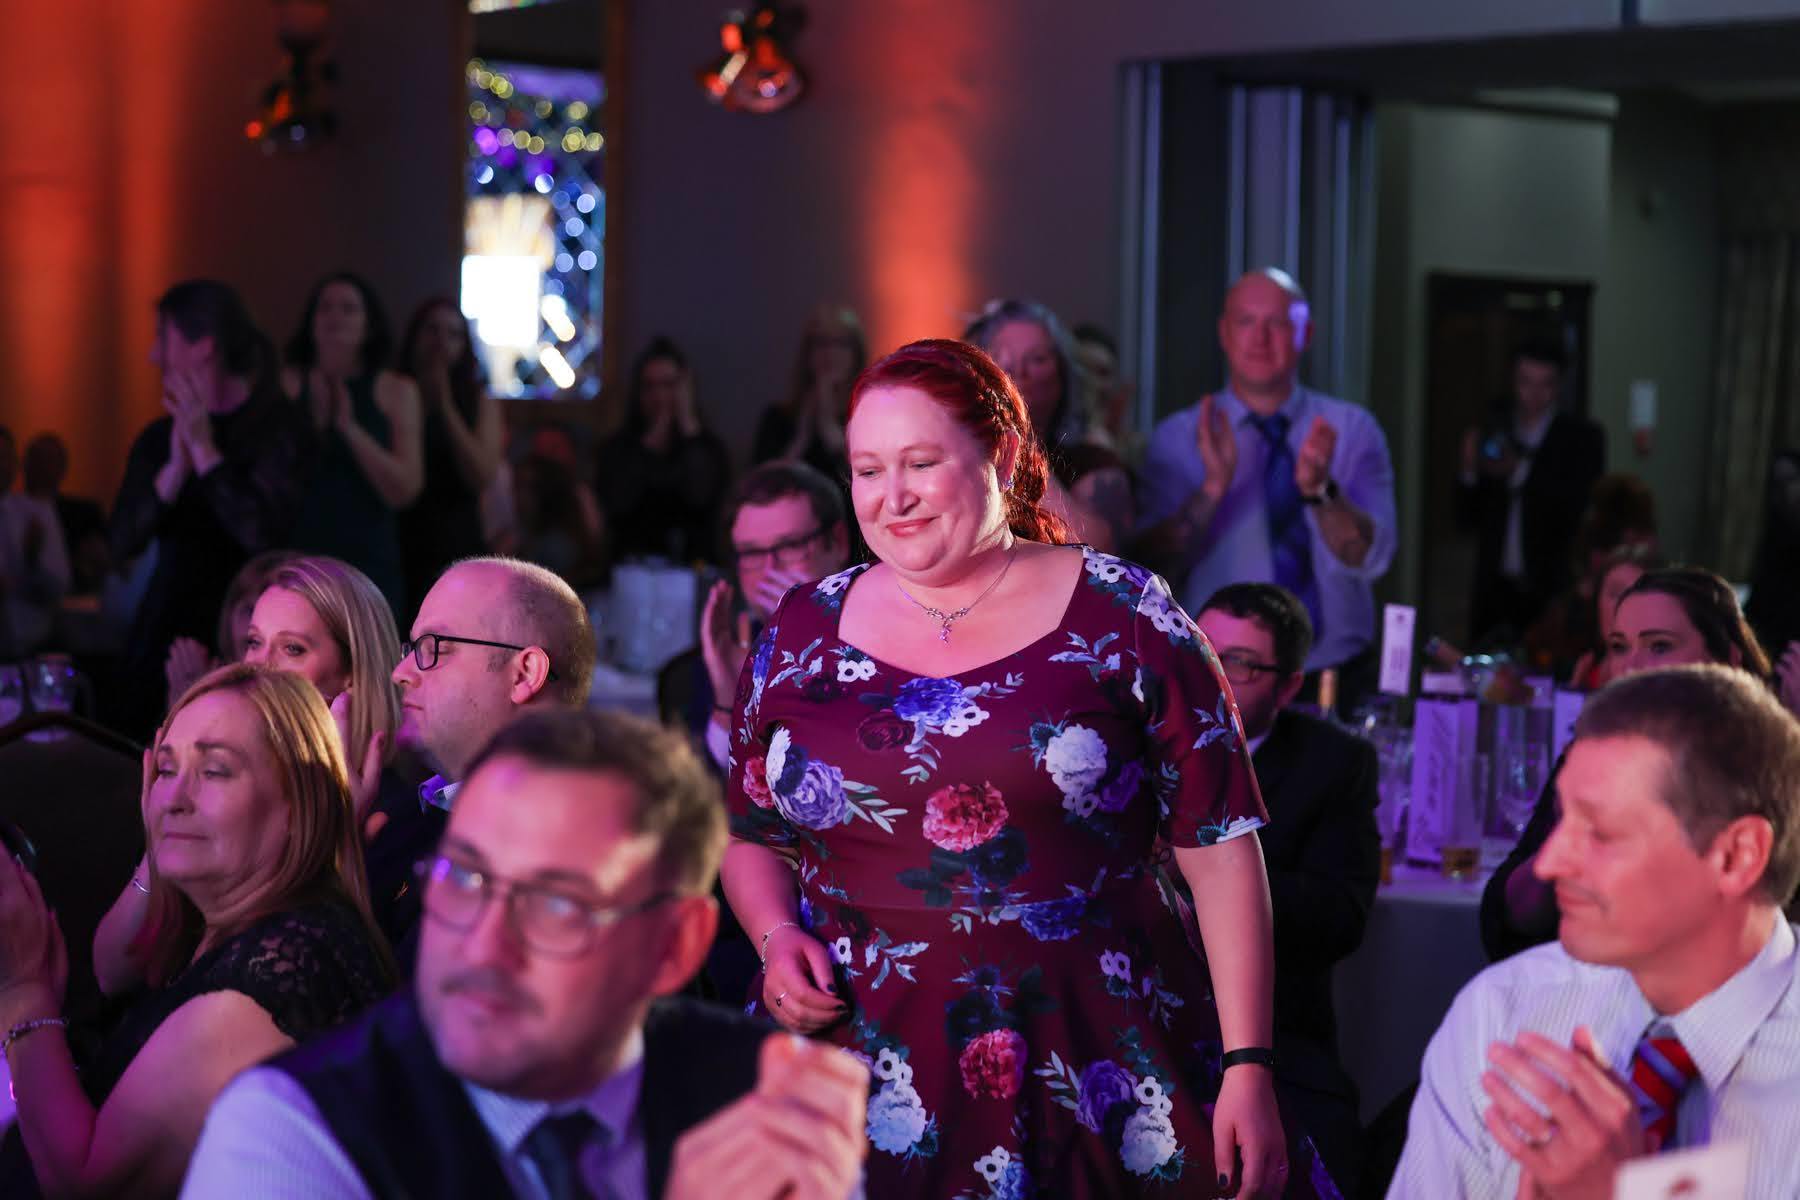 The County Durham Together Awards 2021 take place at Ramside Hall Hotel, Durham City. Winner of the Unsung Hero Award, Tracey Beadle. Picture: CHRIS BOOTH